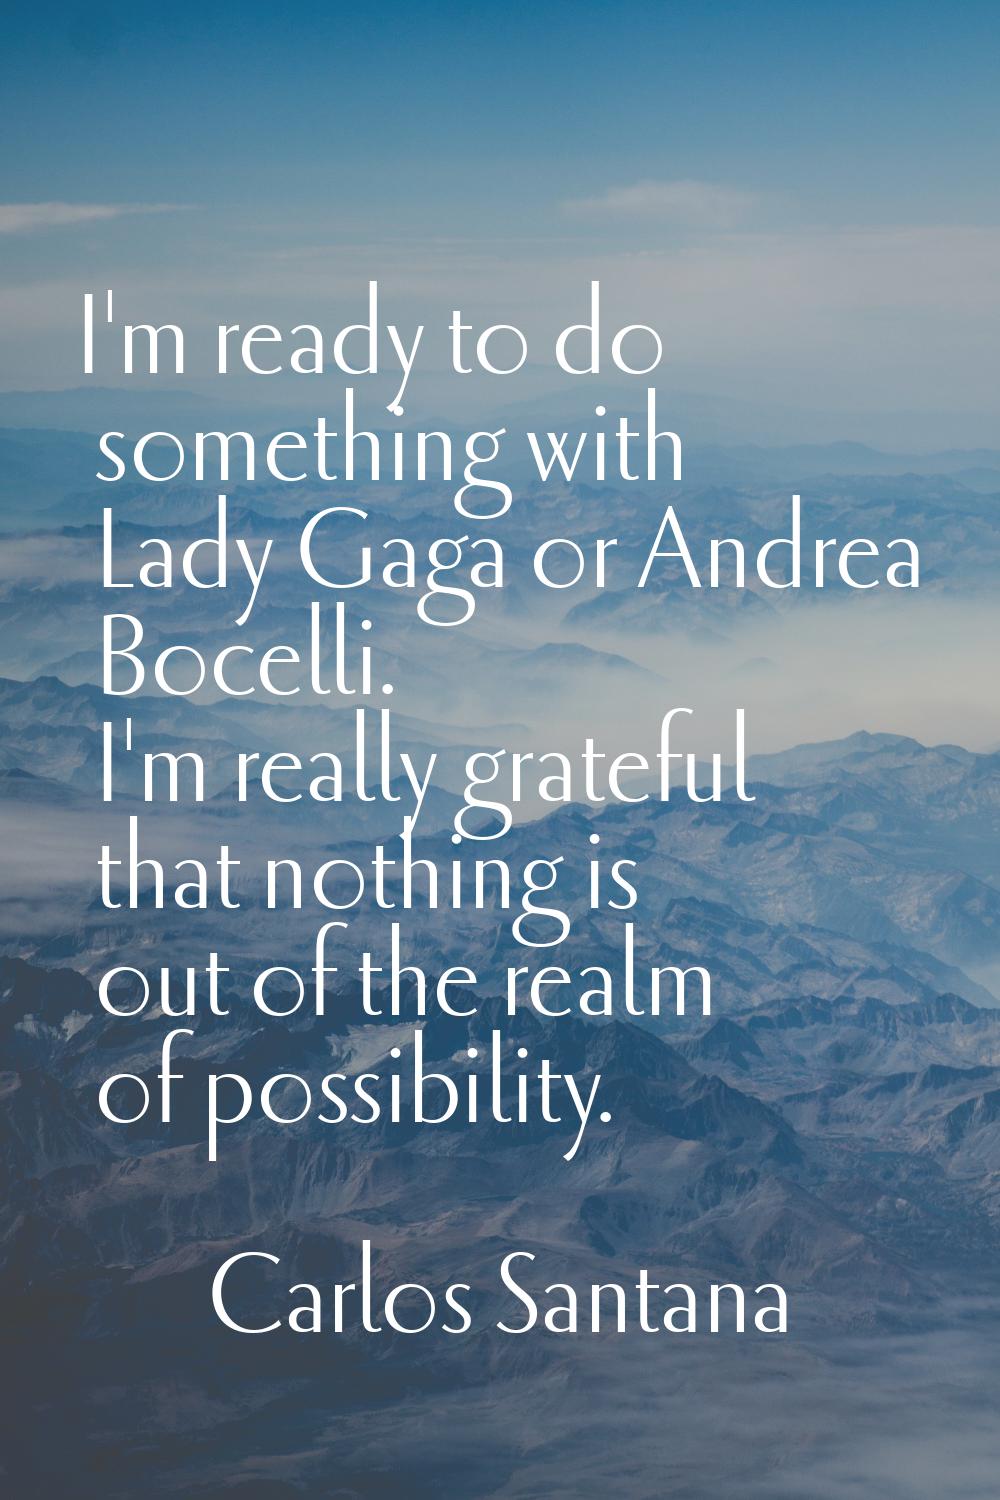 I'm ready to do something with Lady Gaga or Andrea Bocelli. I'm really grateful that nothing is out